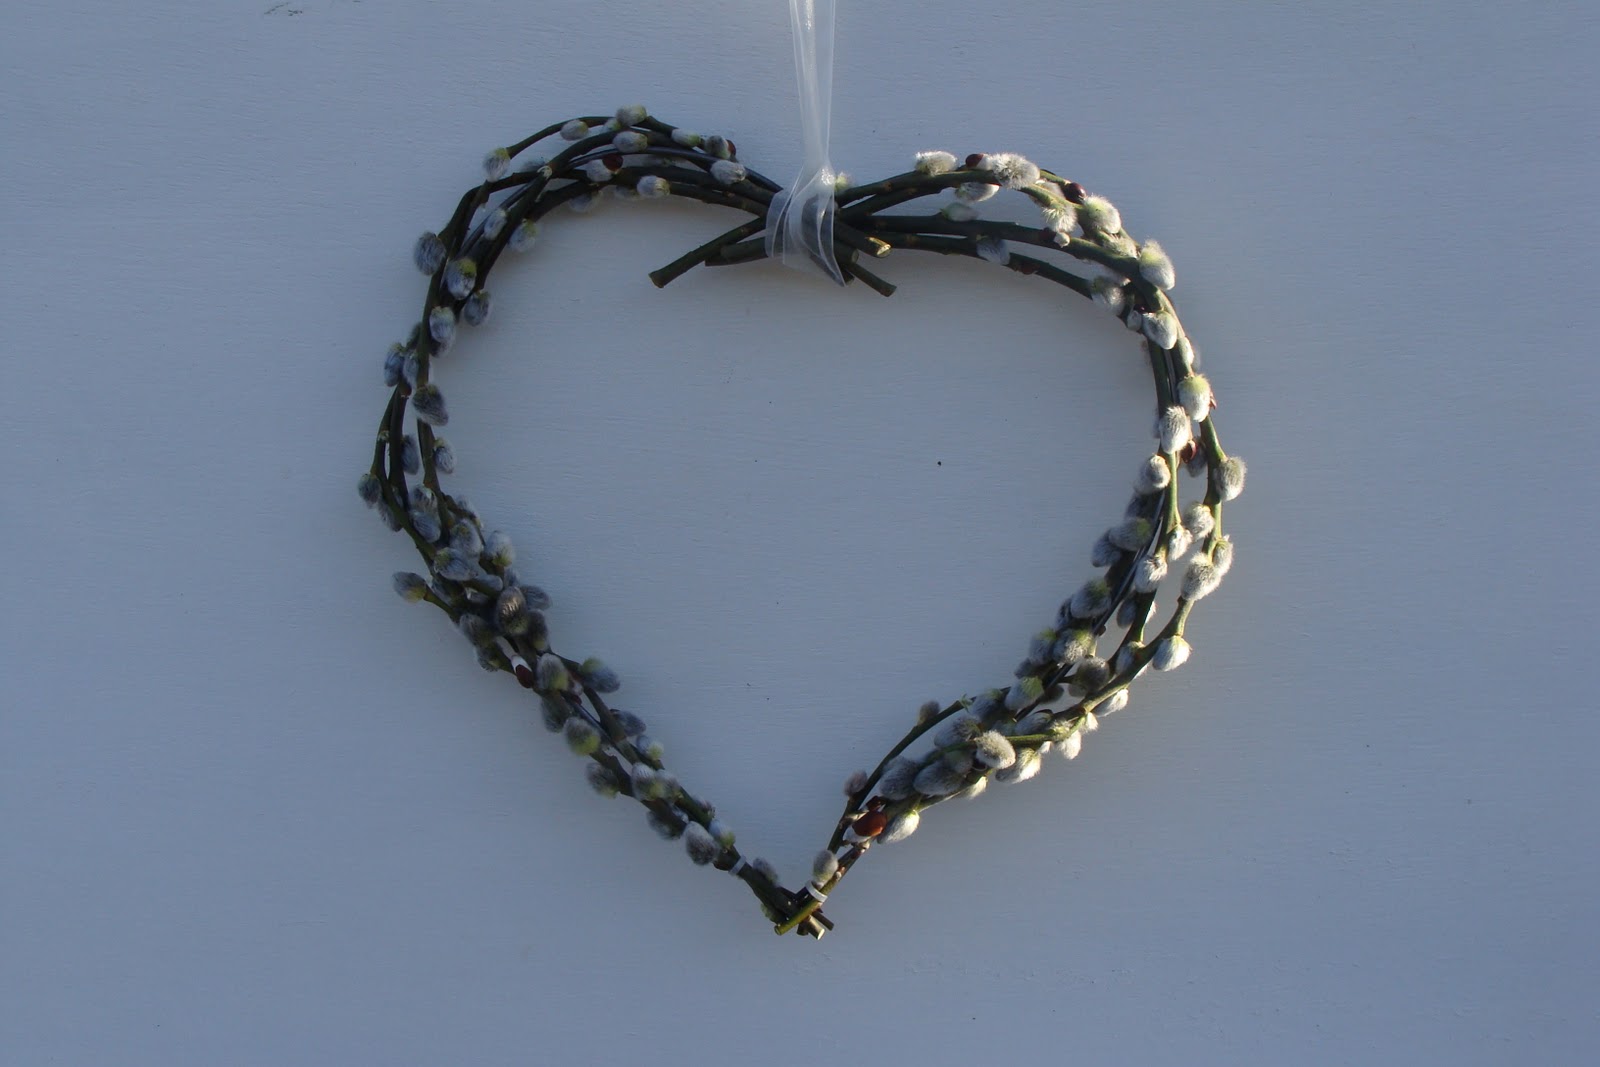 Heart Shaped Pussy Willow Wreath.